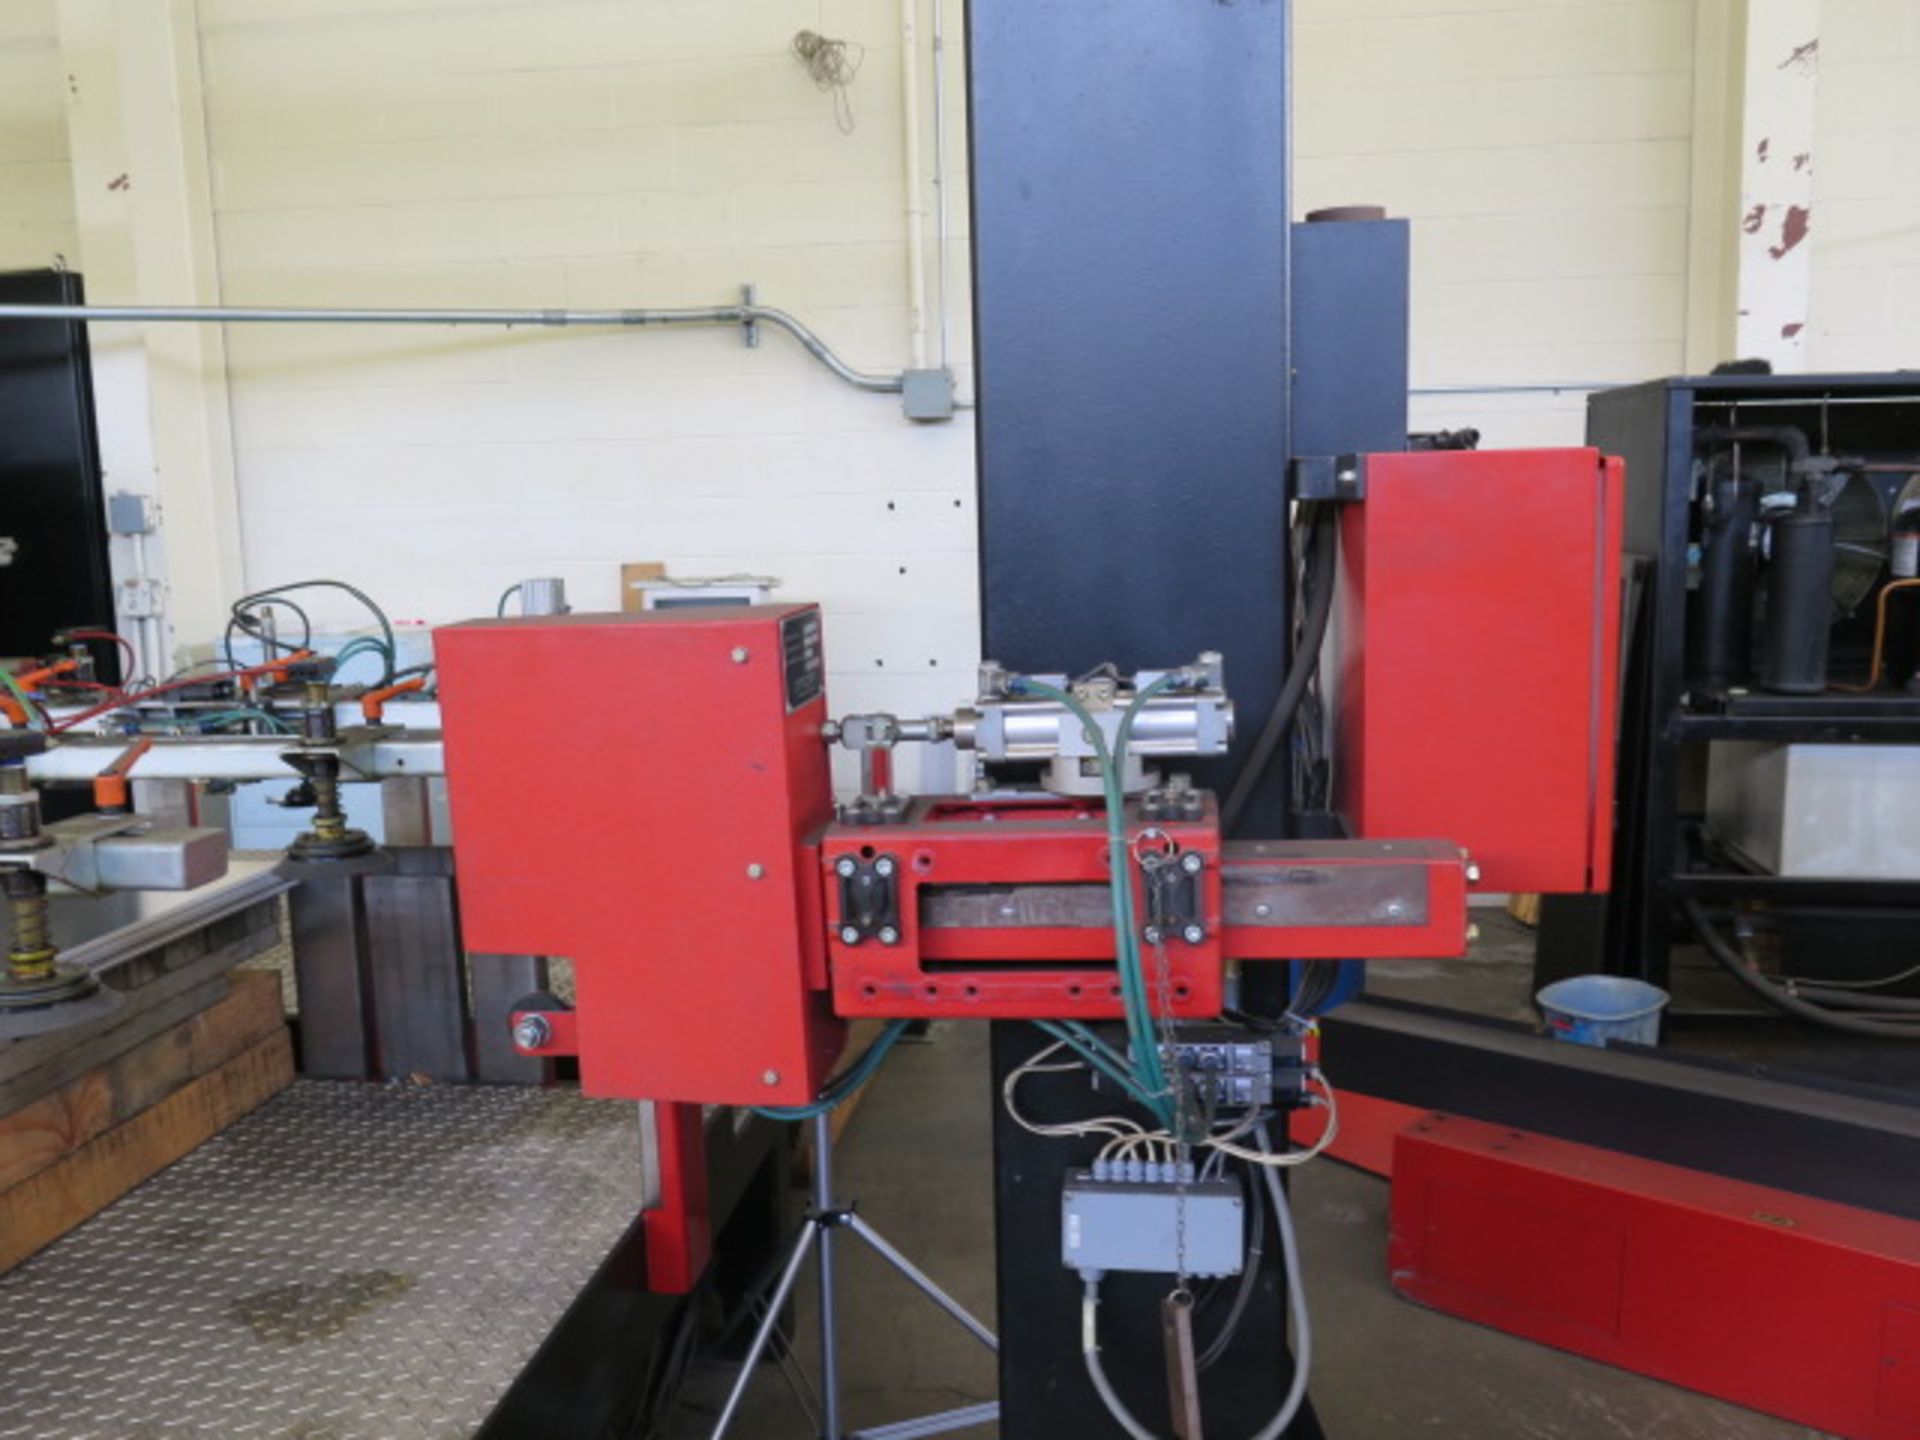 Amada VIPROS 357 30-Ton CNC Turret Punch Cell s/n 35710664 w/ 04P-C Controls, 58-Station, SOLD AS IS - Image 27 of 37